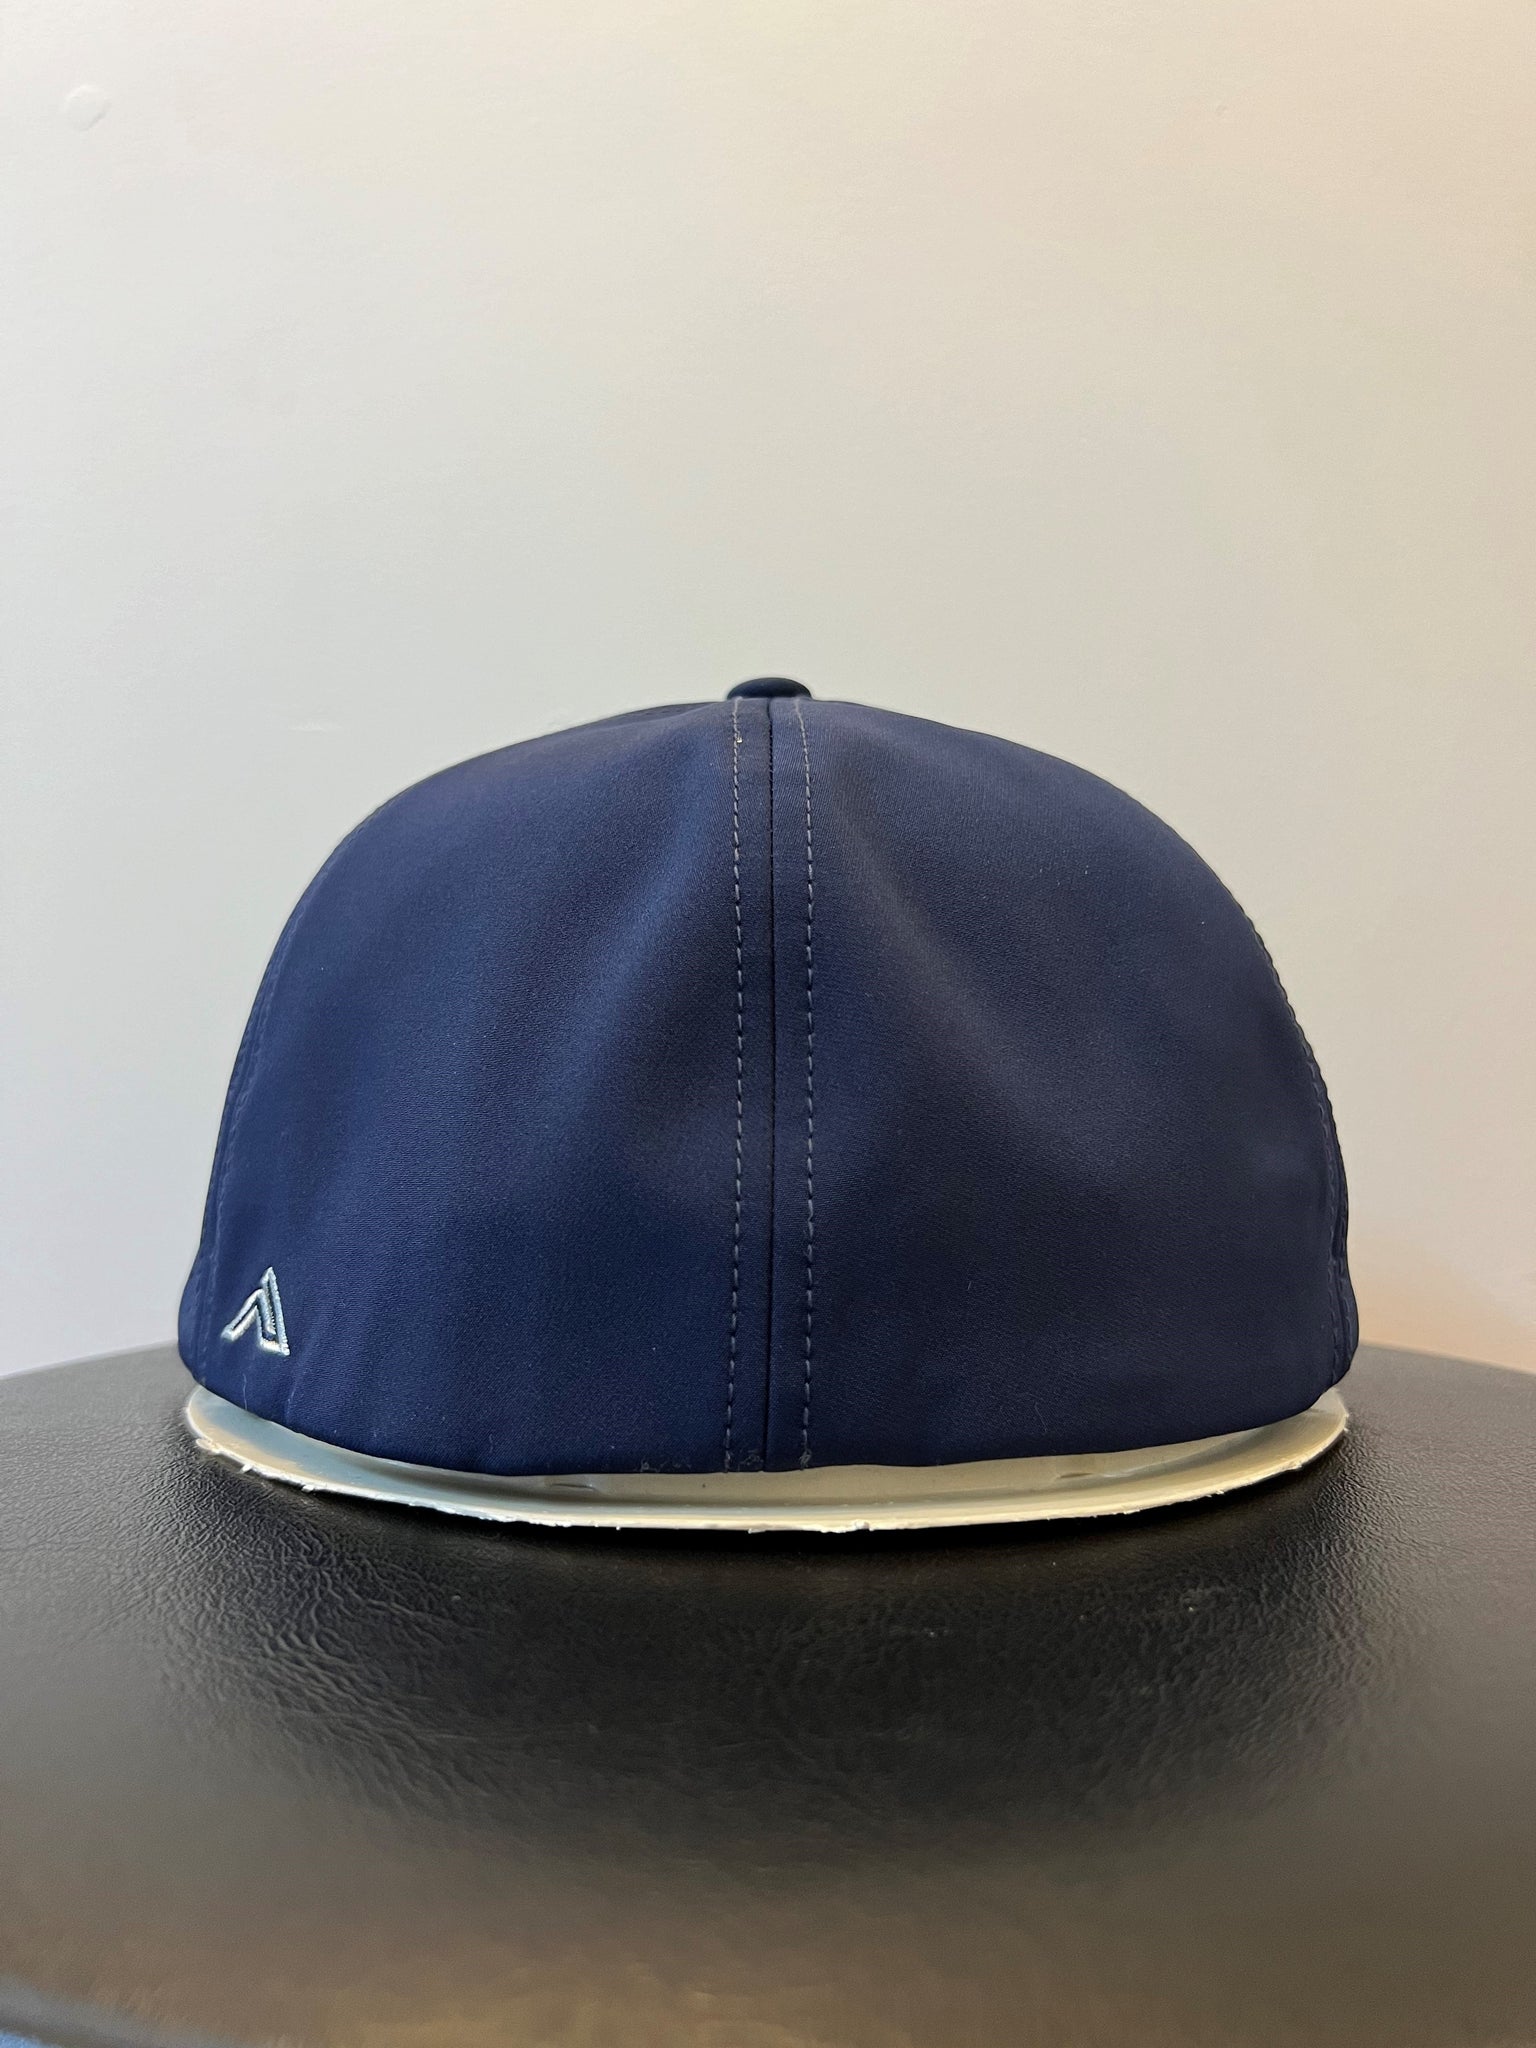 VIR 3D Track Map Cap (Size: S/M or L/XL)